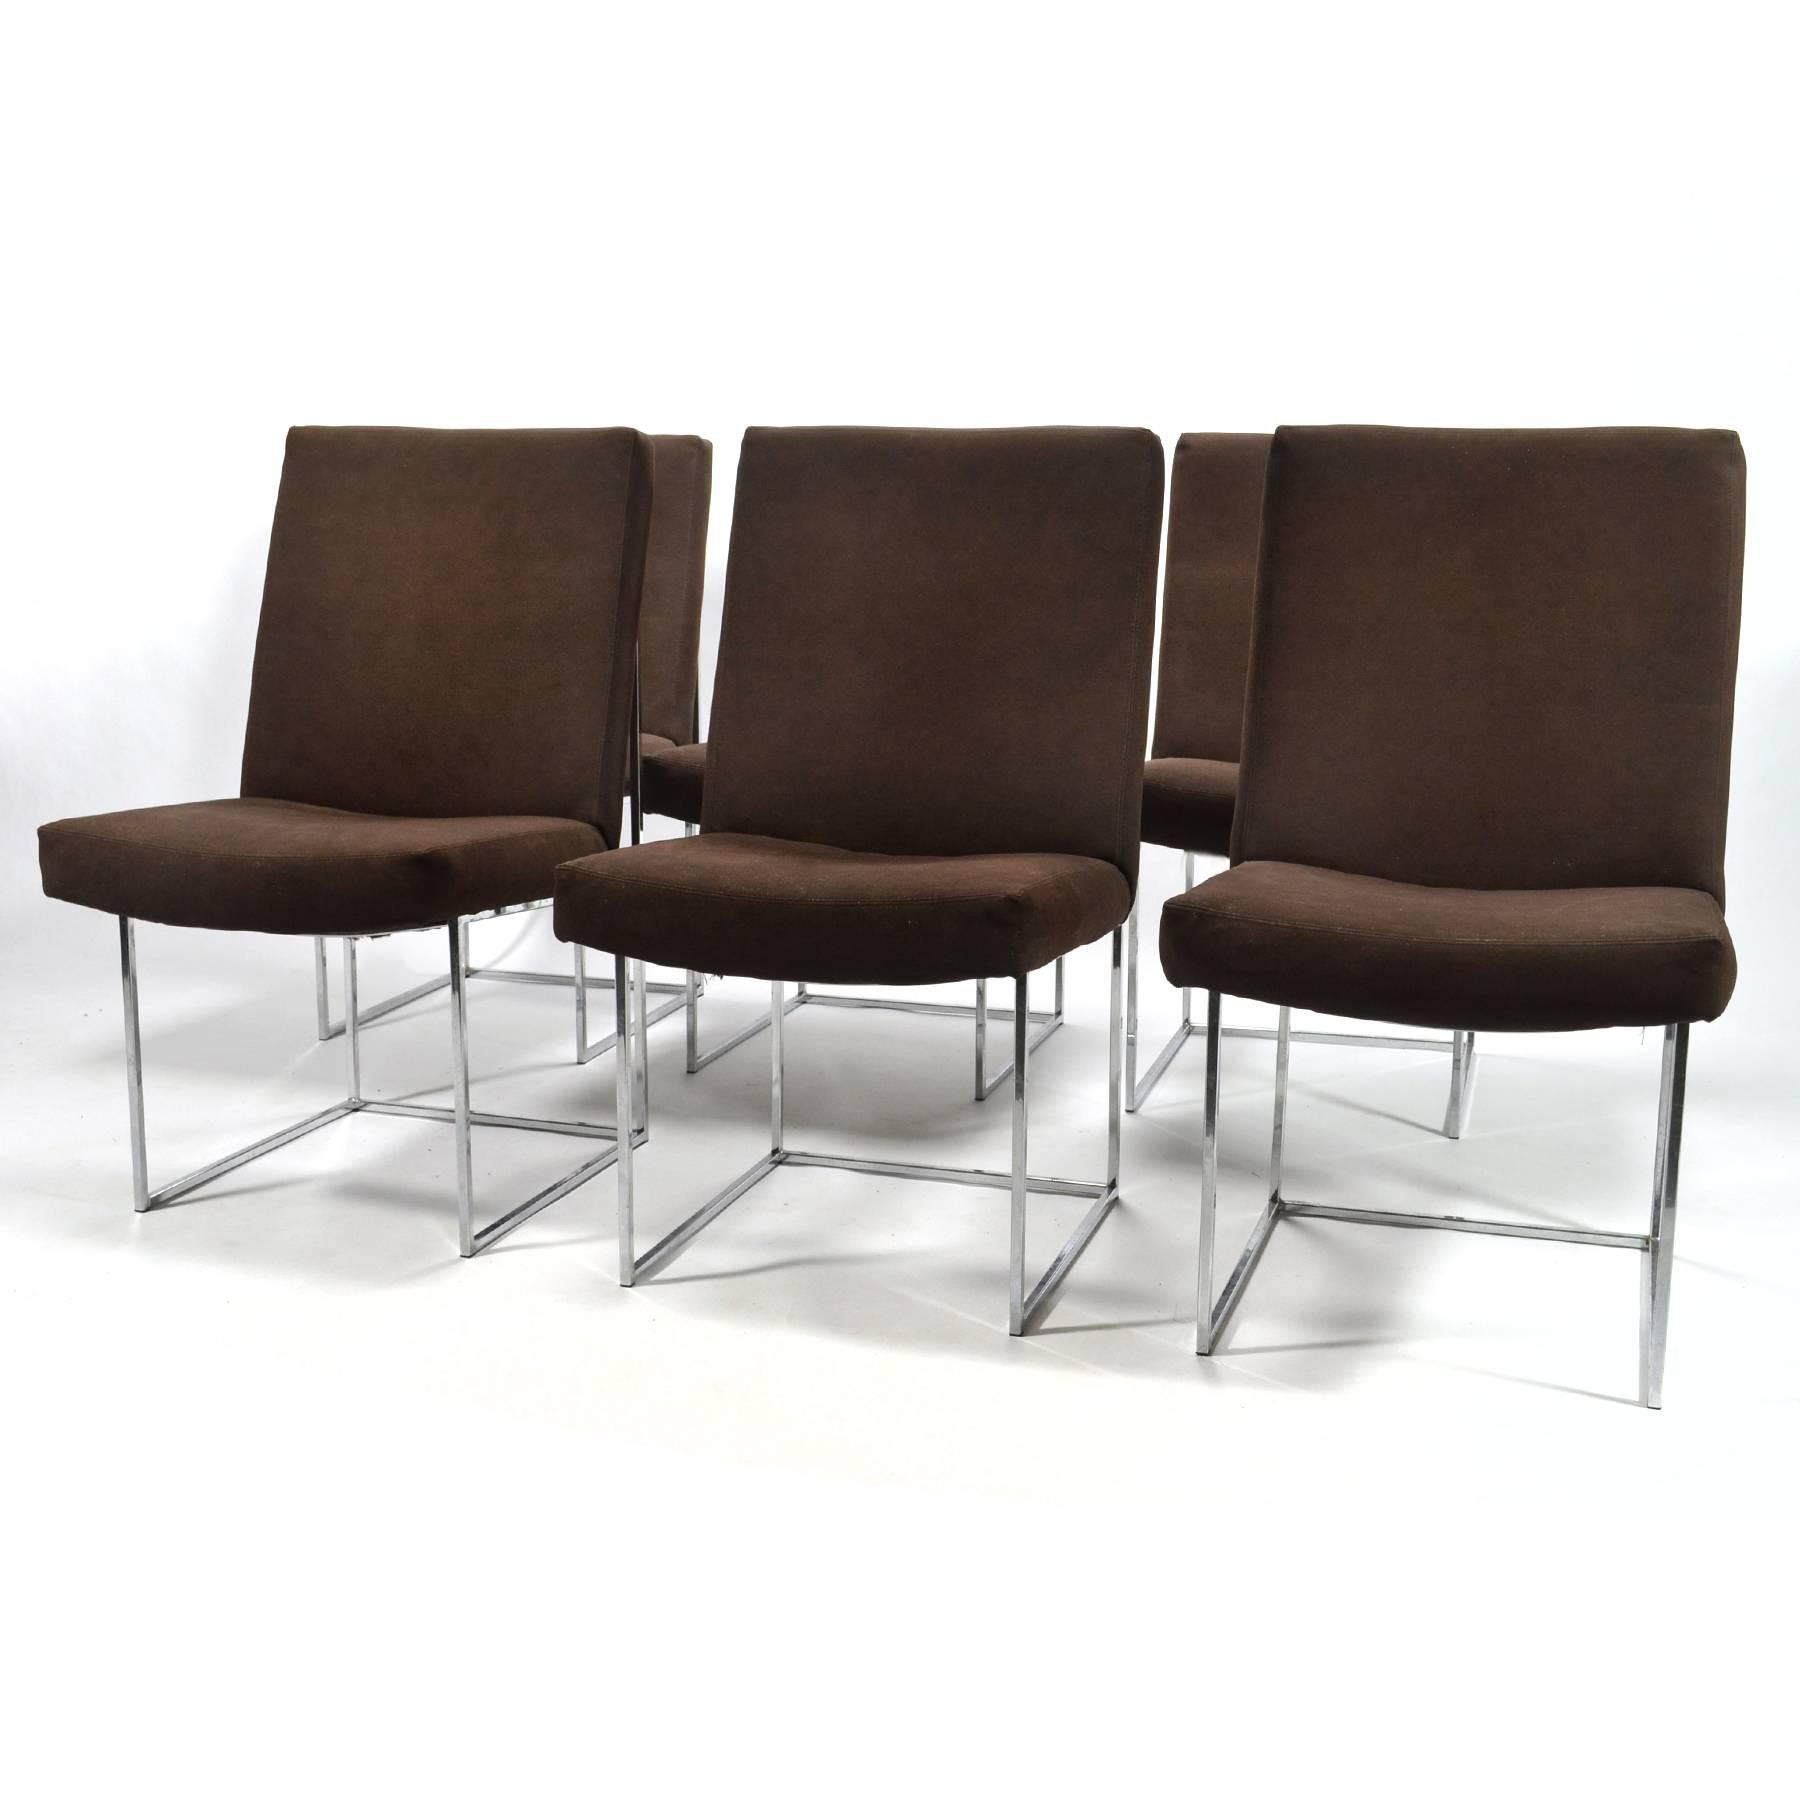 Late 20th Century Milo Baughman Set of Six Dining Chairs by Thayer Coggin For Sale